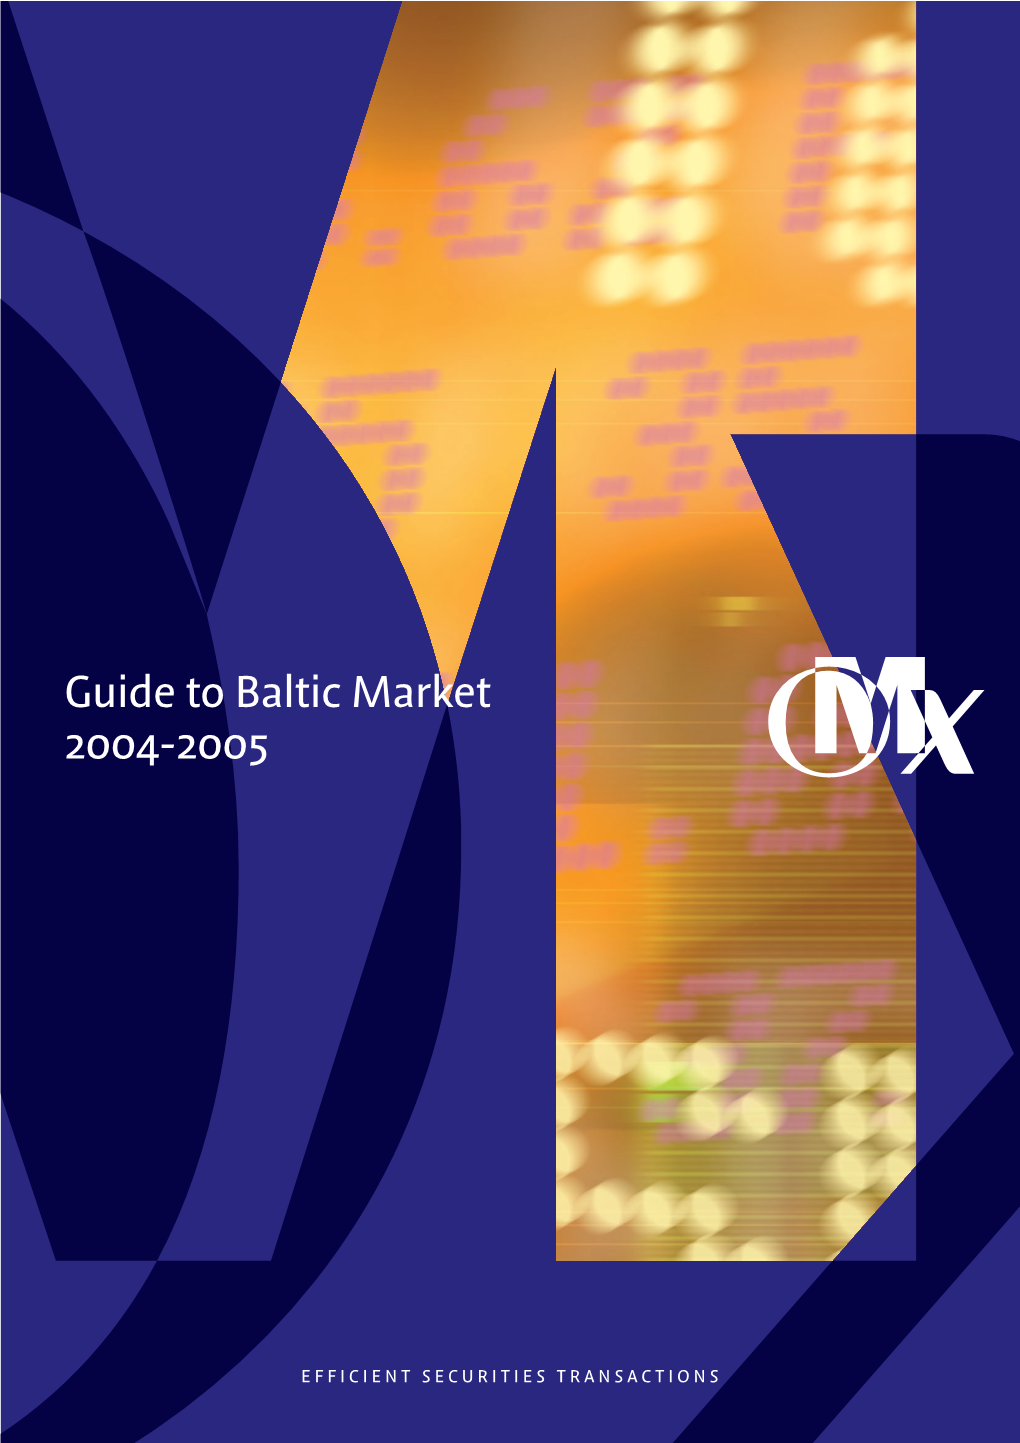 Guide to Baltic Market 2004-2005